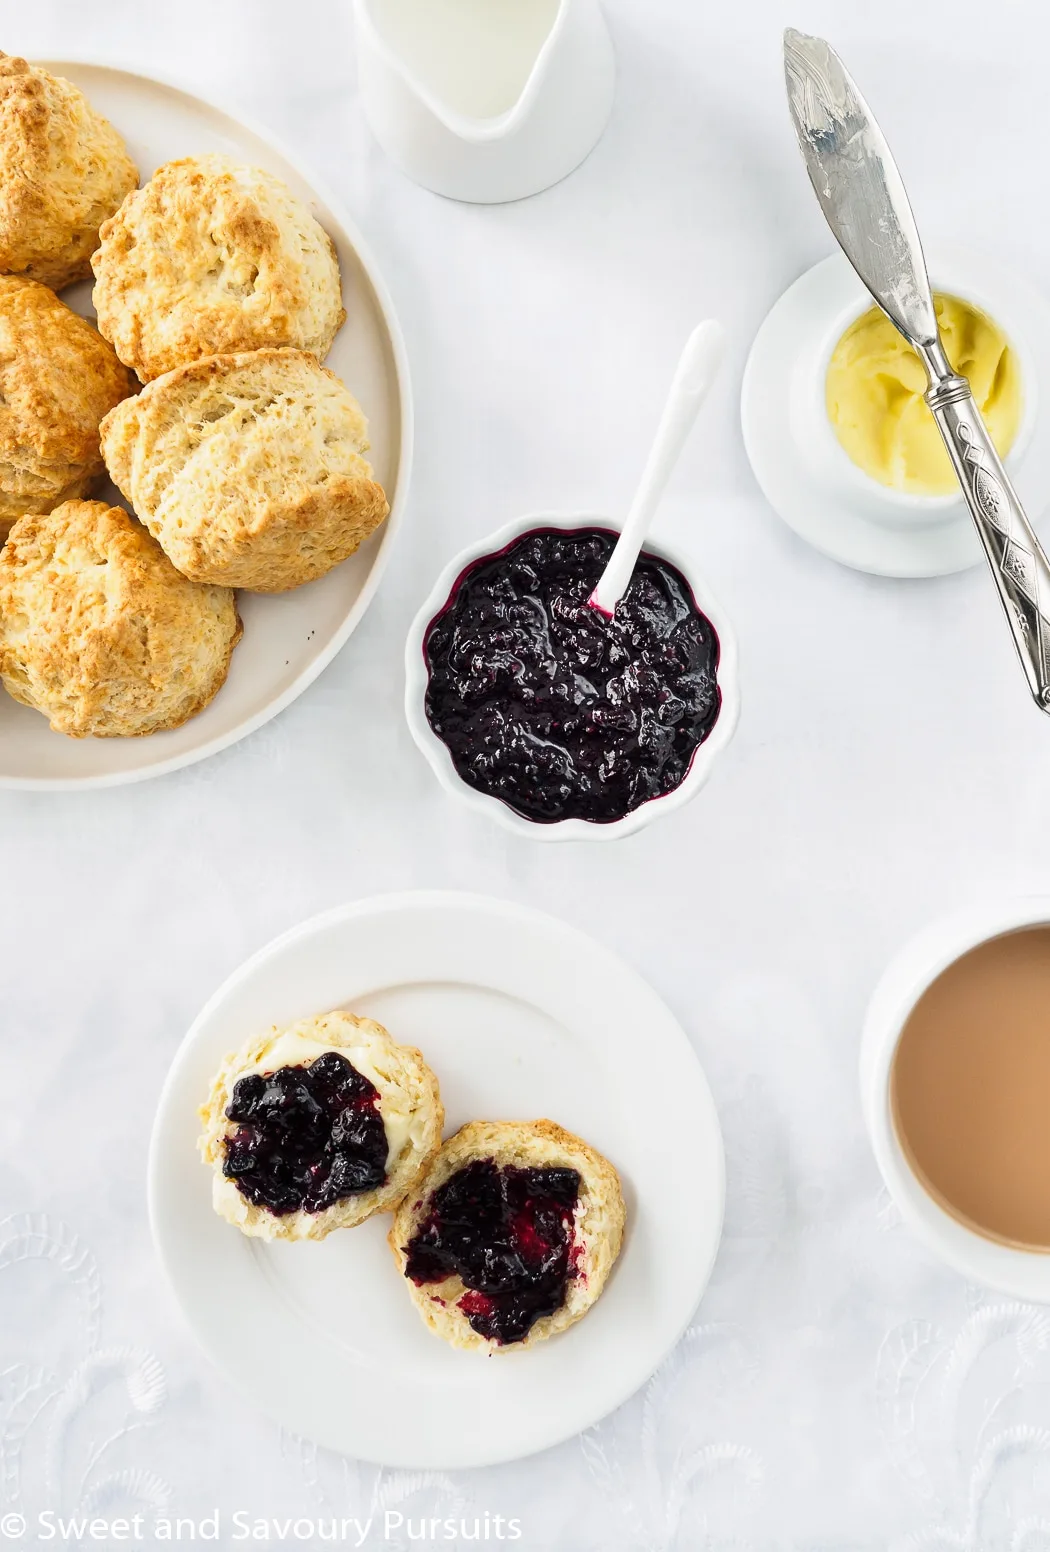 A dish of Irish Scones served with tea, butter and mixed berry jam.